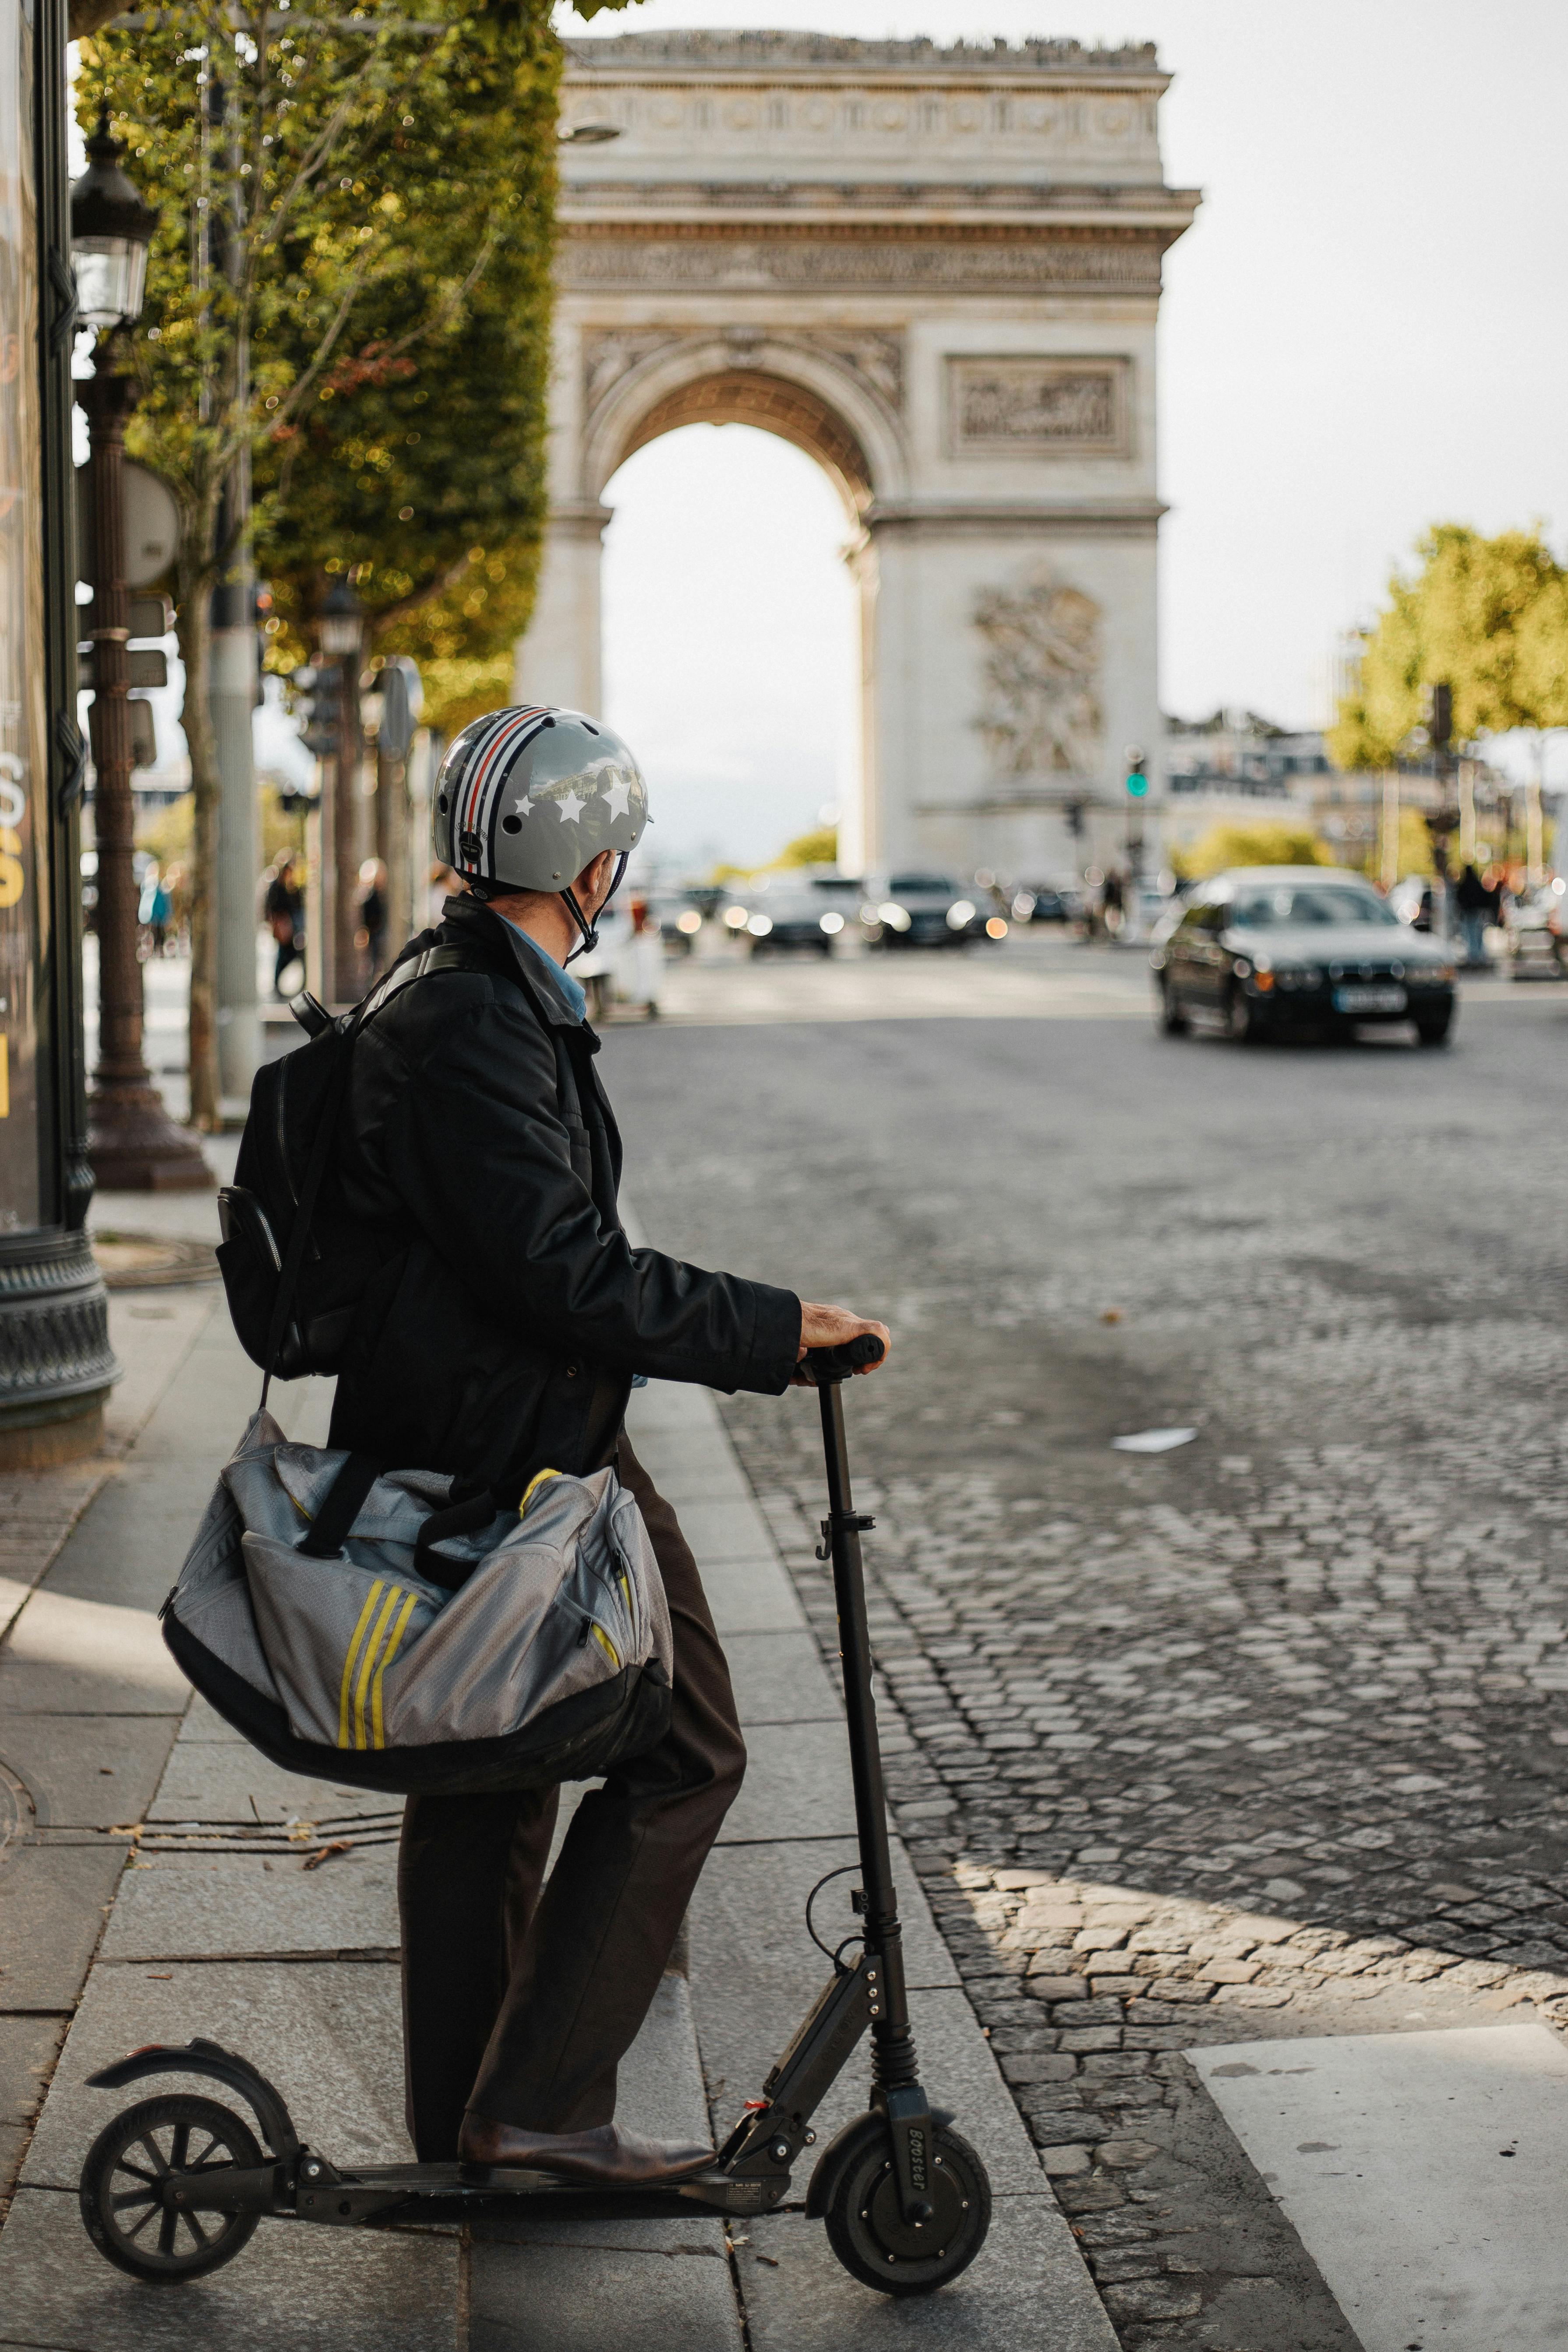 a man riding a scooter in the street of paris